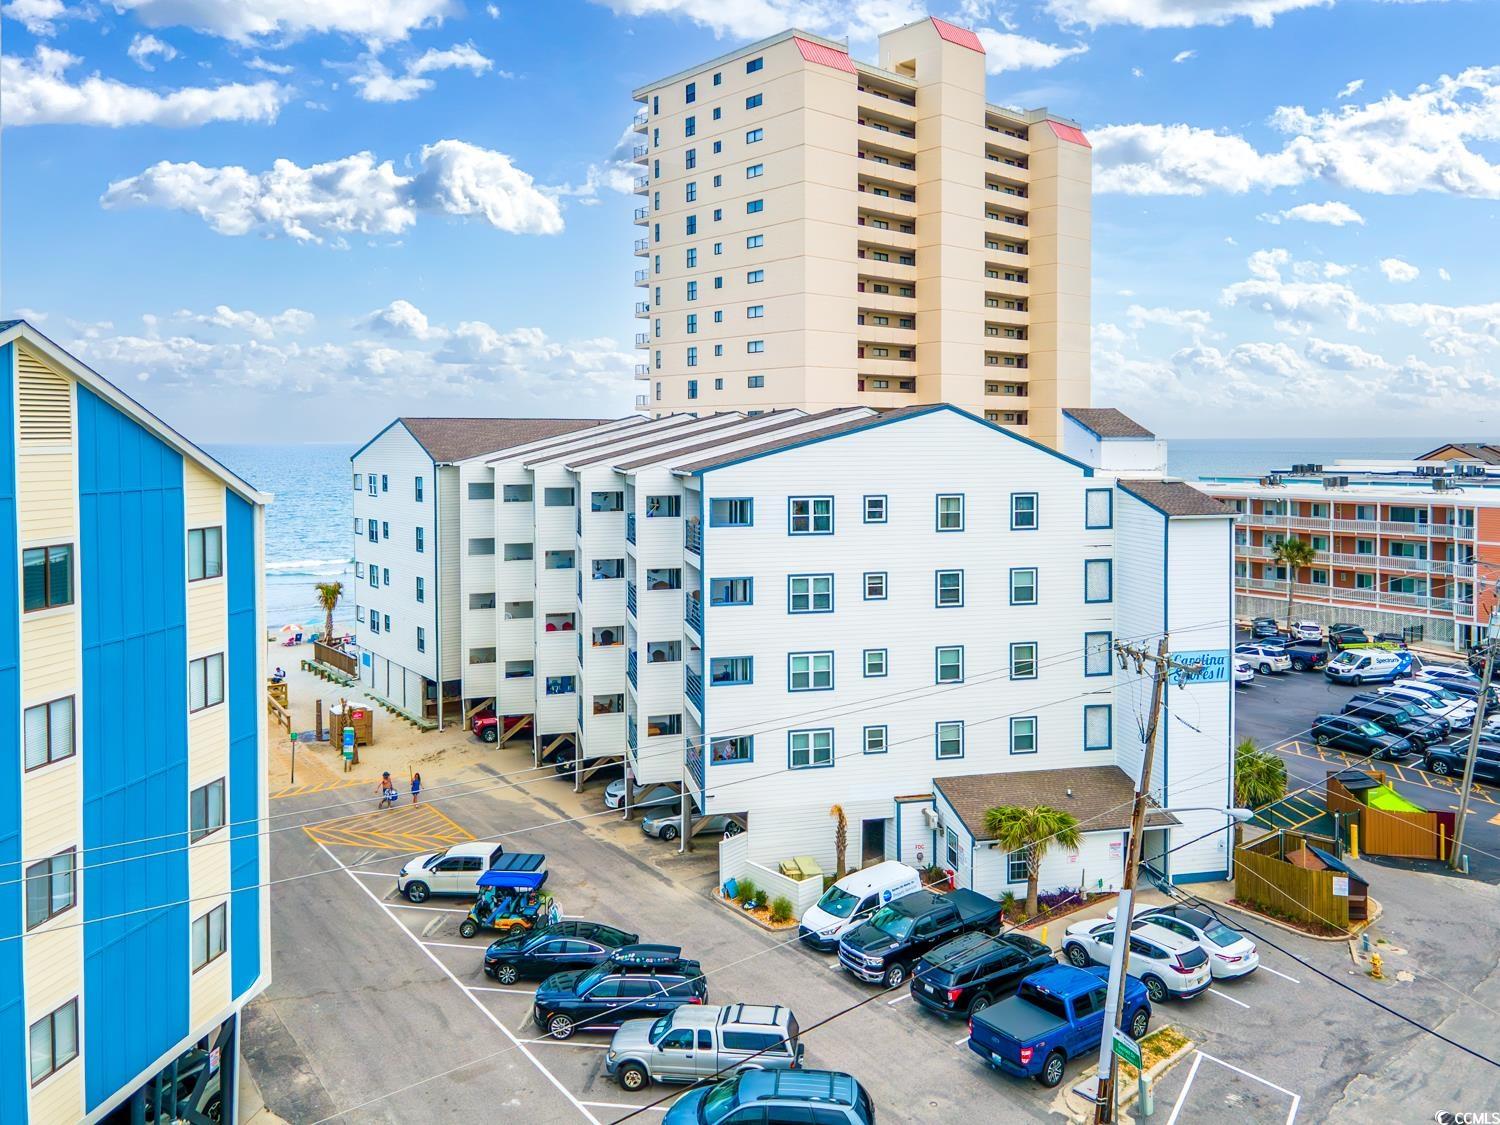 great opportunity with ocean views now available in the highly sought after building in garden city beach, carolina shores. this first floor 1br/1b unit comes fully furnished and offers hardwood flooring, stainless steel appliances, tile backsplash and more. bedroom is very spacious and has plenty of closet space. notable exterior features include balcony with ocean views, community pool on the oceanfront, community laundry room and more. carolina shores is well known for its location in garden city beach, which is close to all shopping, dining and attractions the area has to offer. make an appointment today!